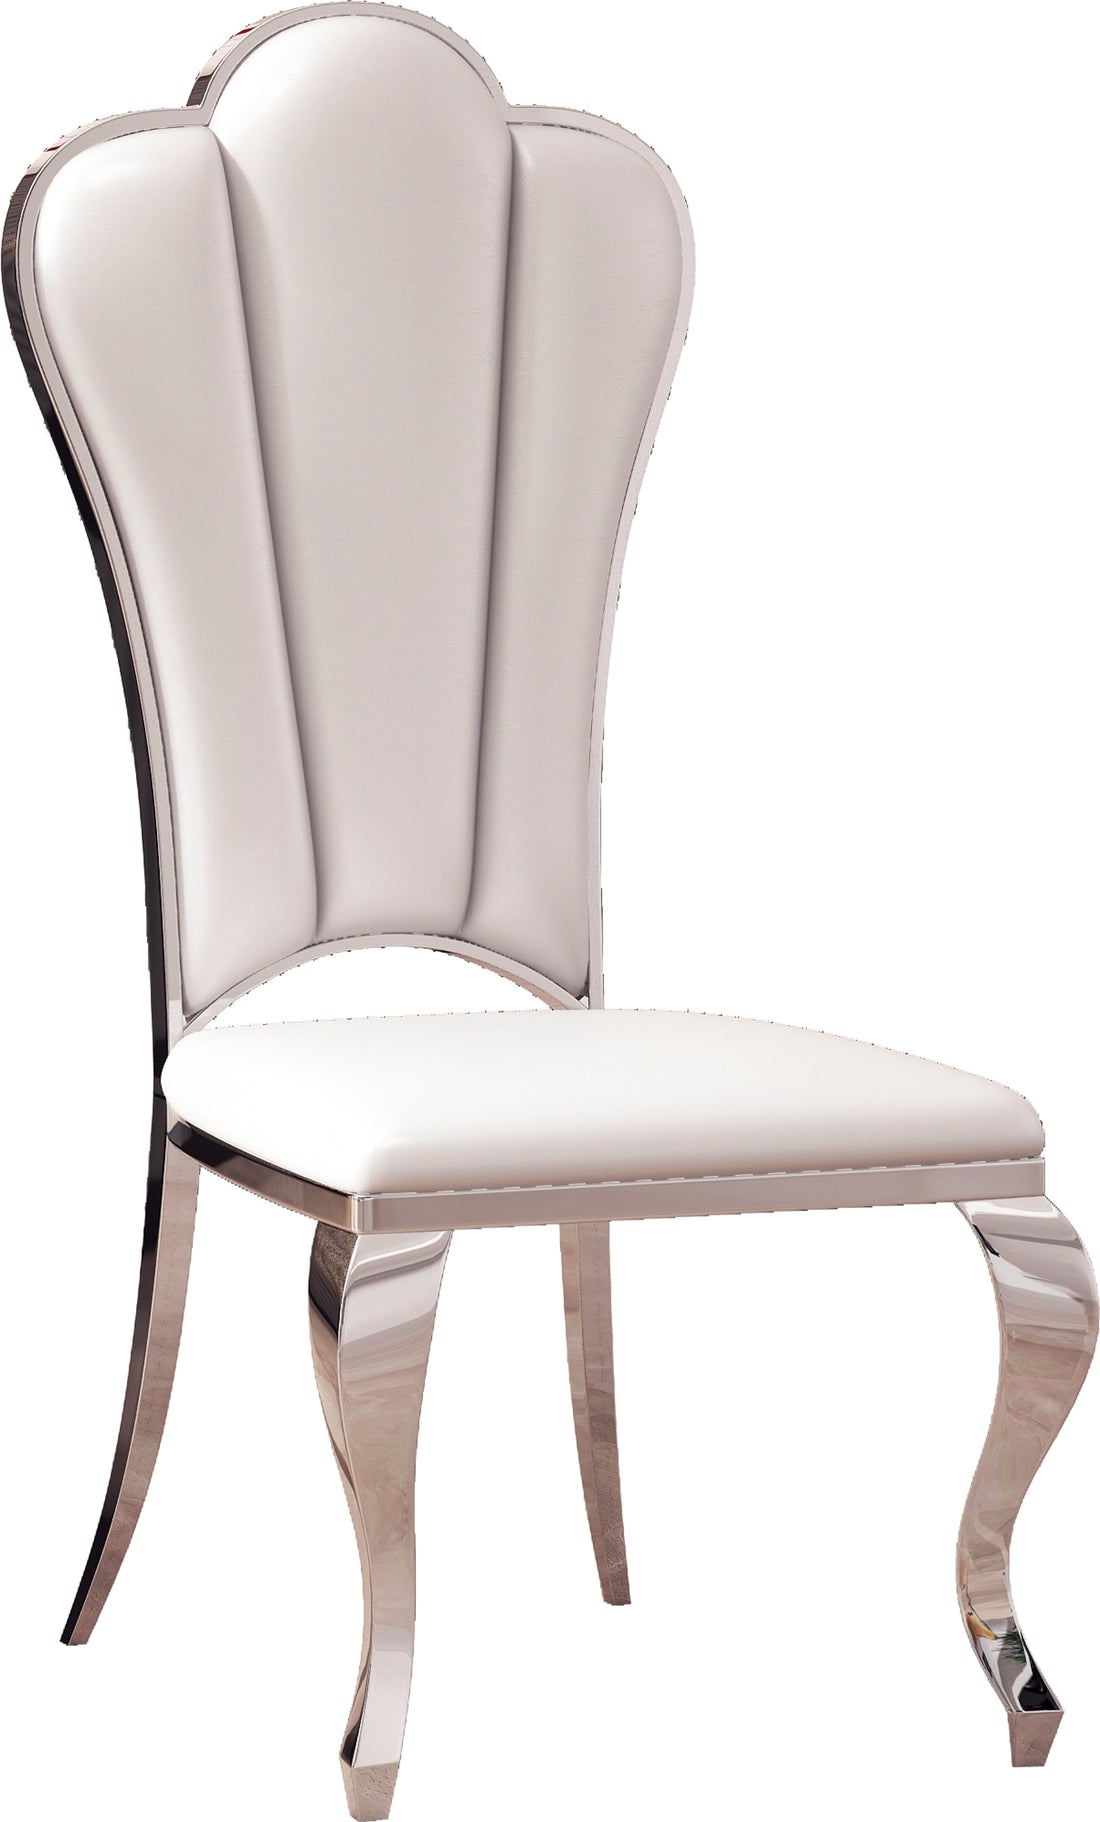 Moderndining Chairs Set Of 2, Unique Backrest